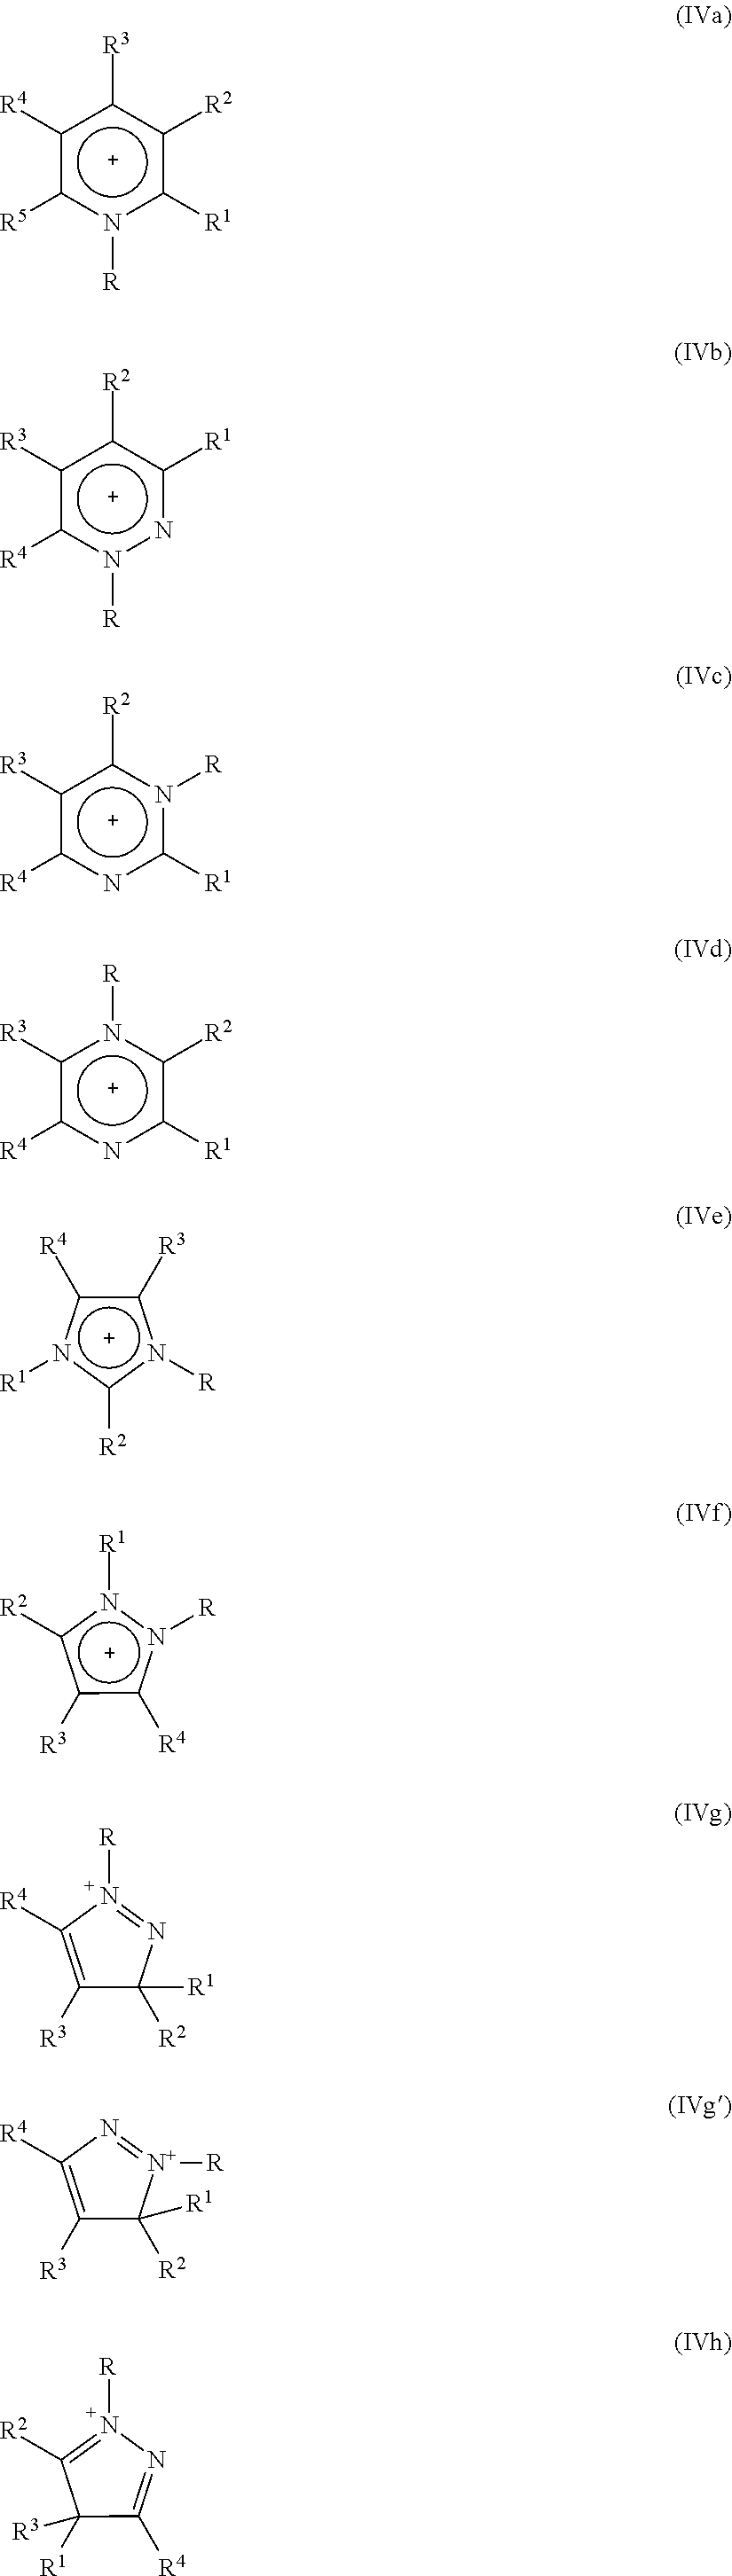 Process for isomerizing a saturated, branched and cyclic hydrocarbon